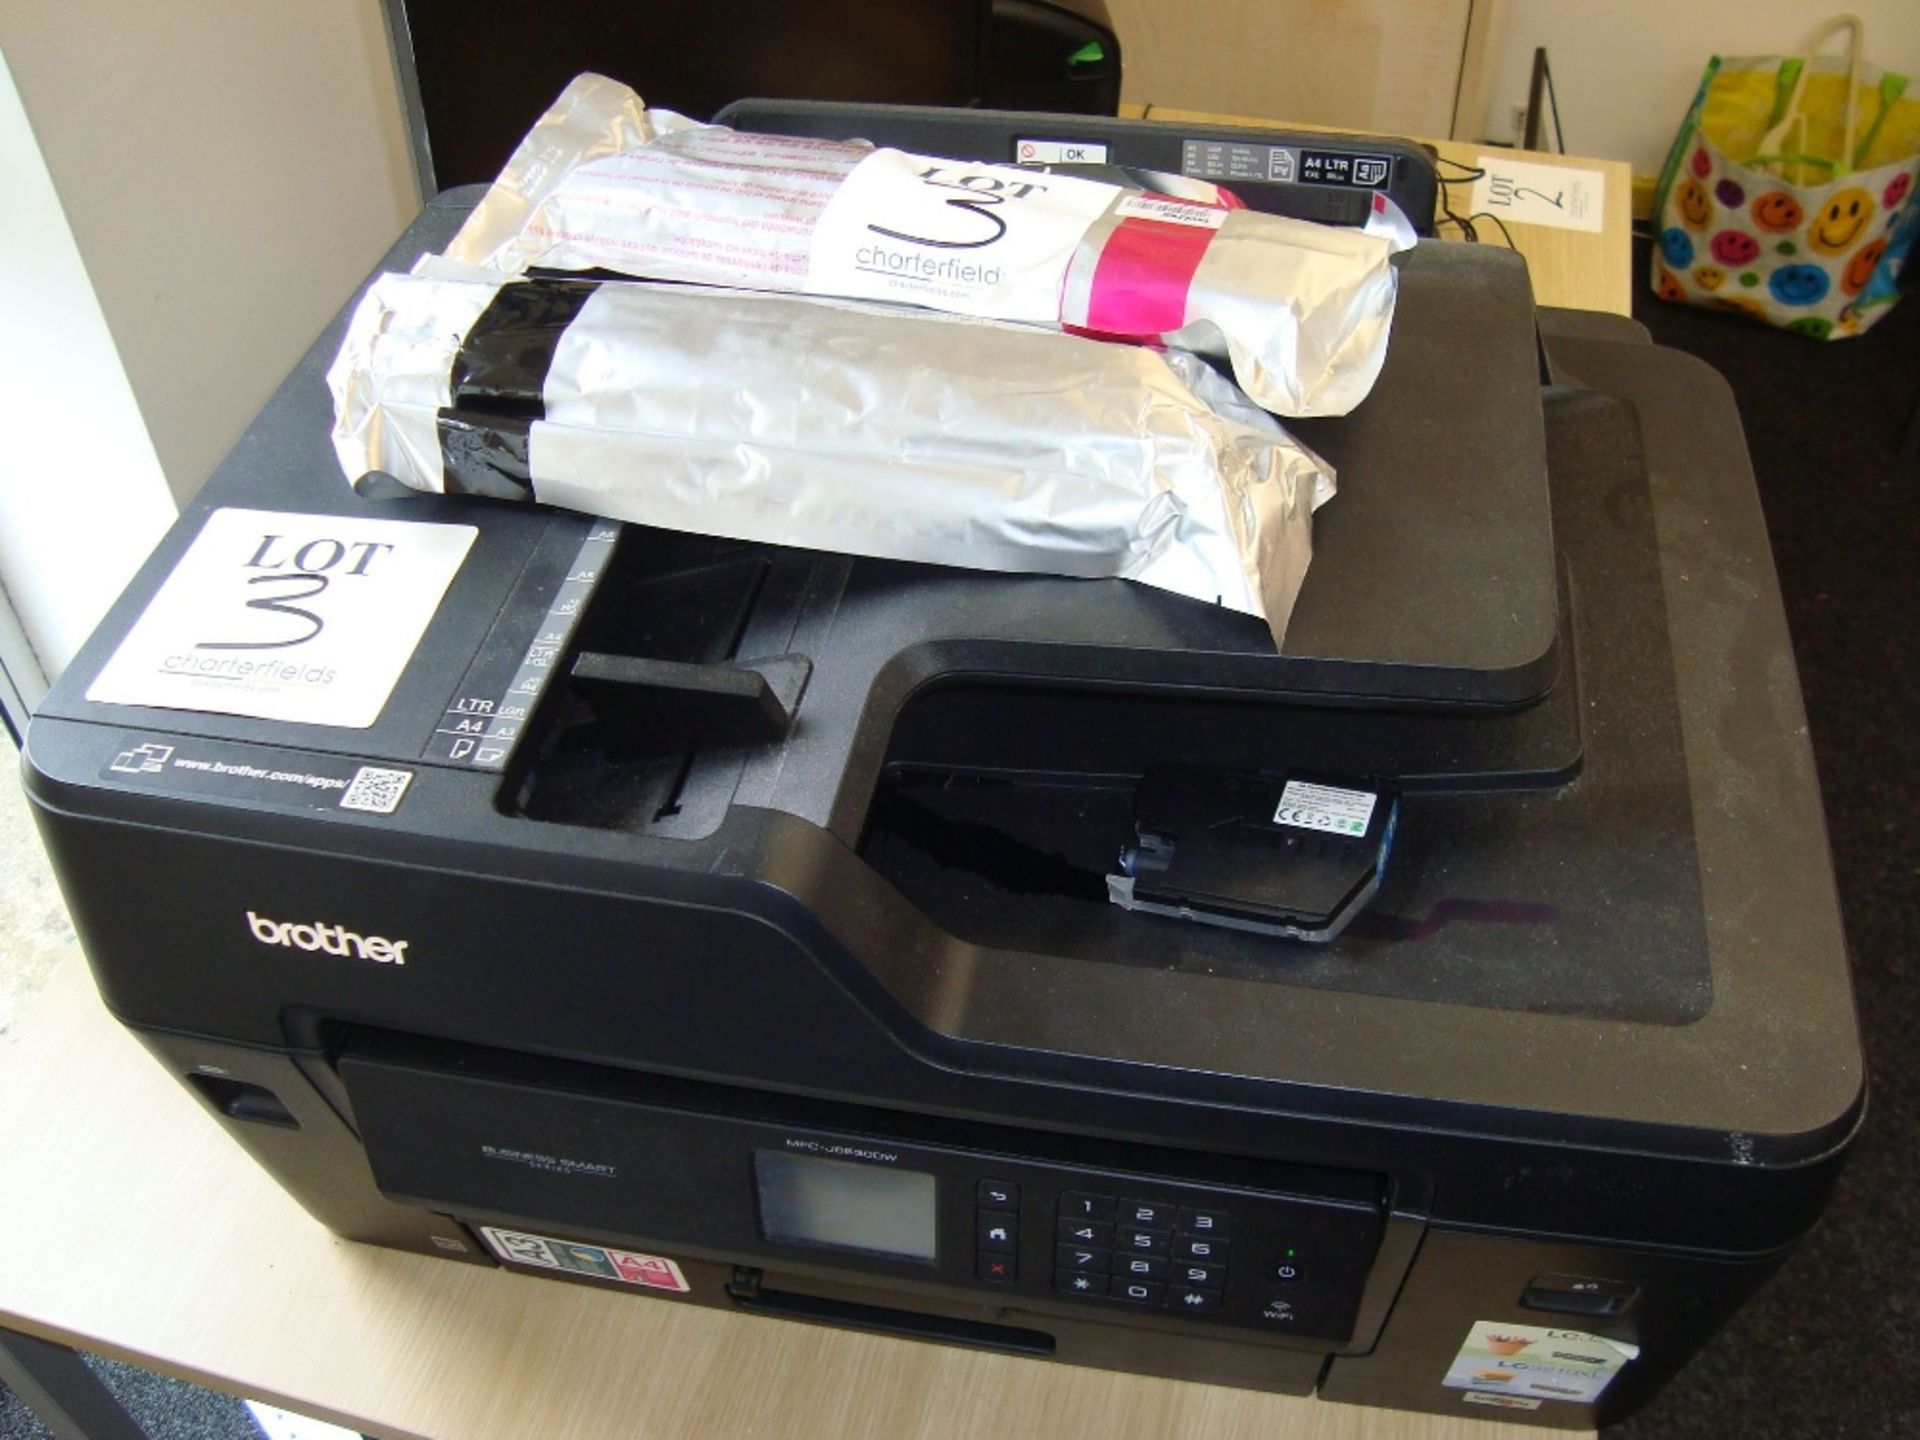 A Brother MFC-J6530DW multi function printer with spare ink cartridges as lotted